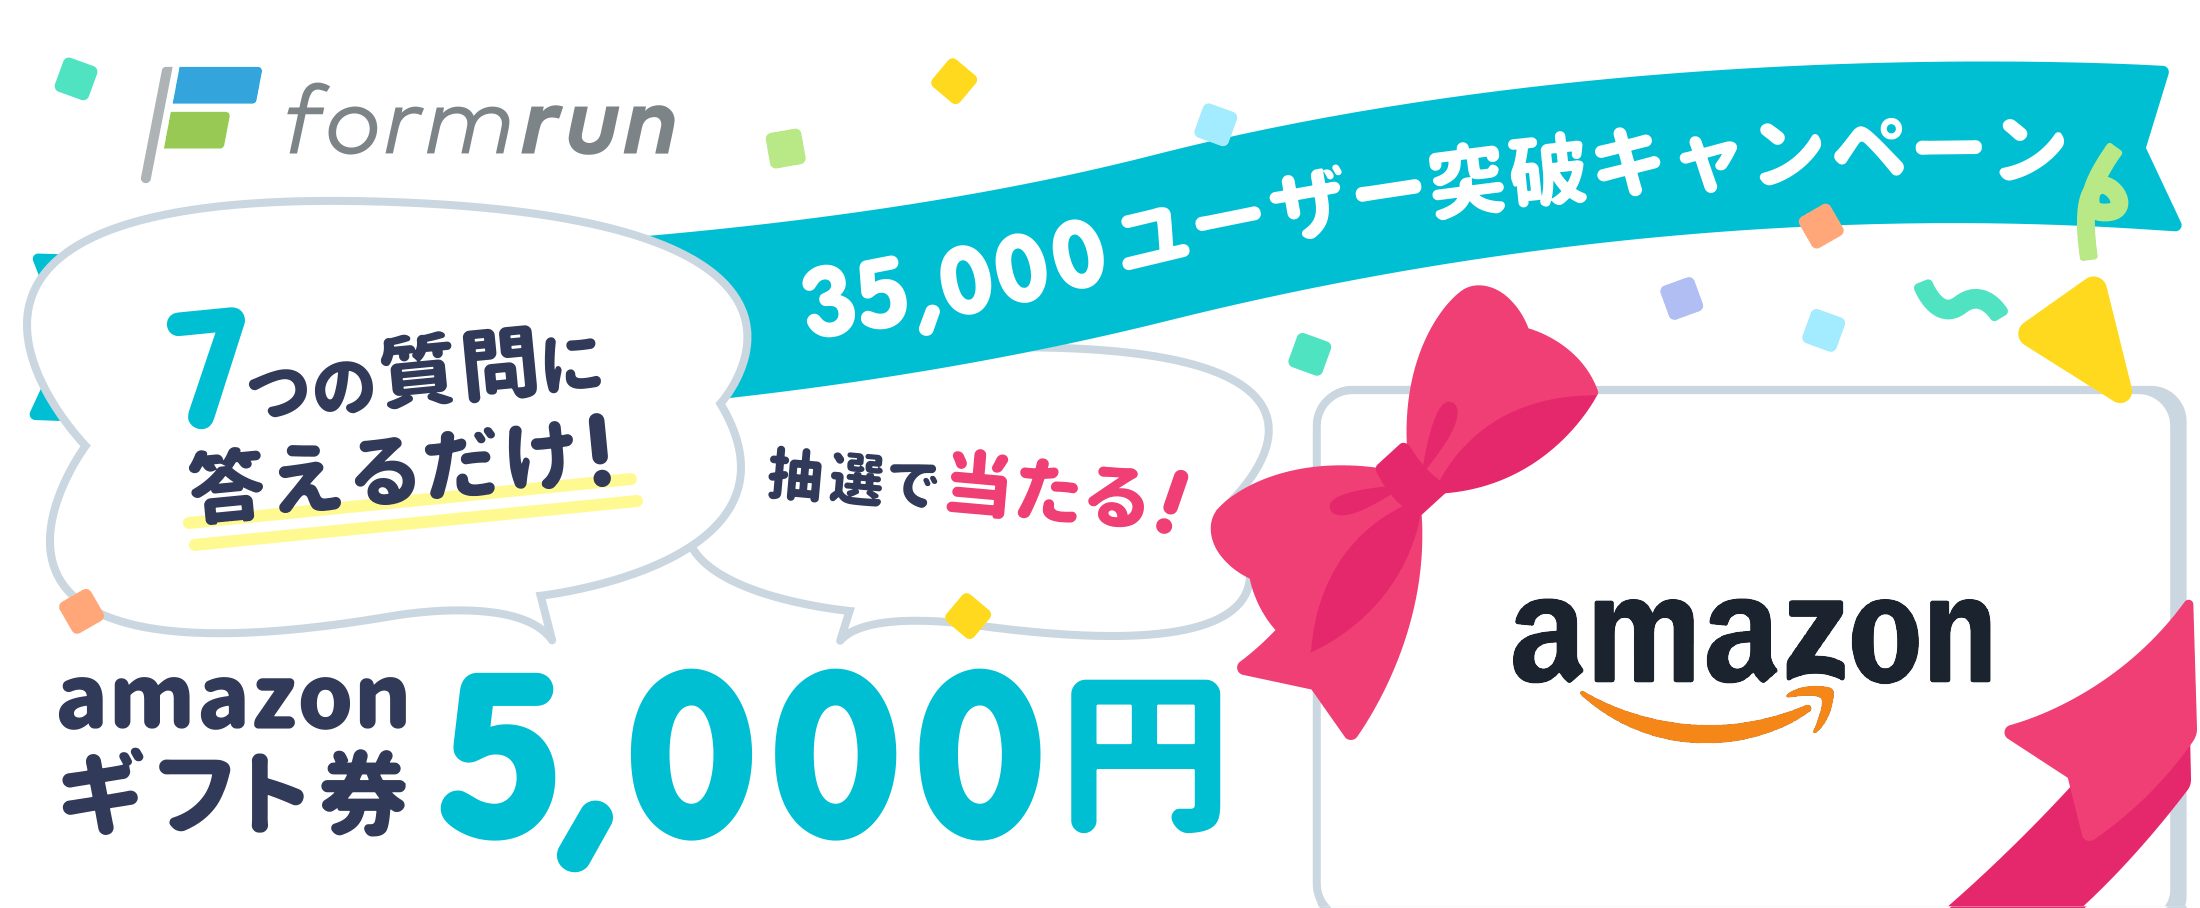 campaign35000users